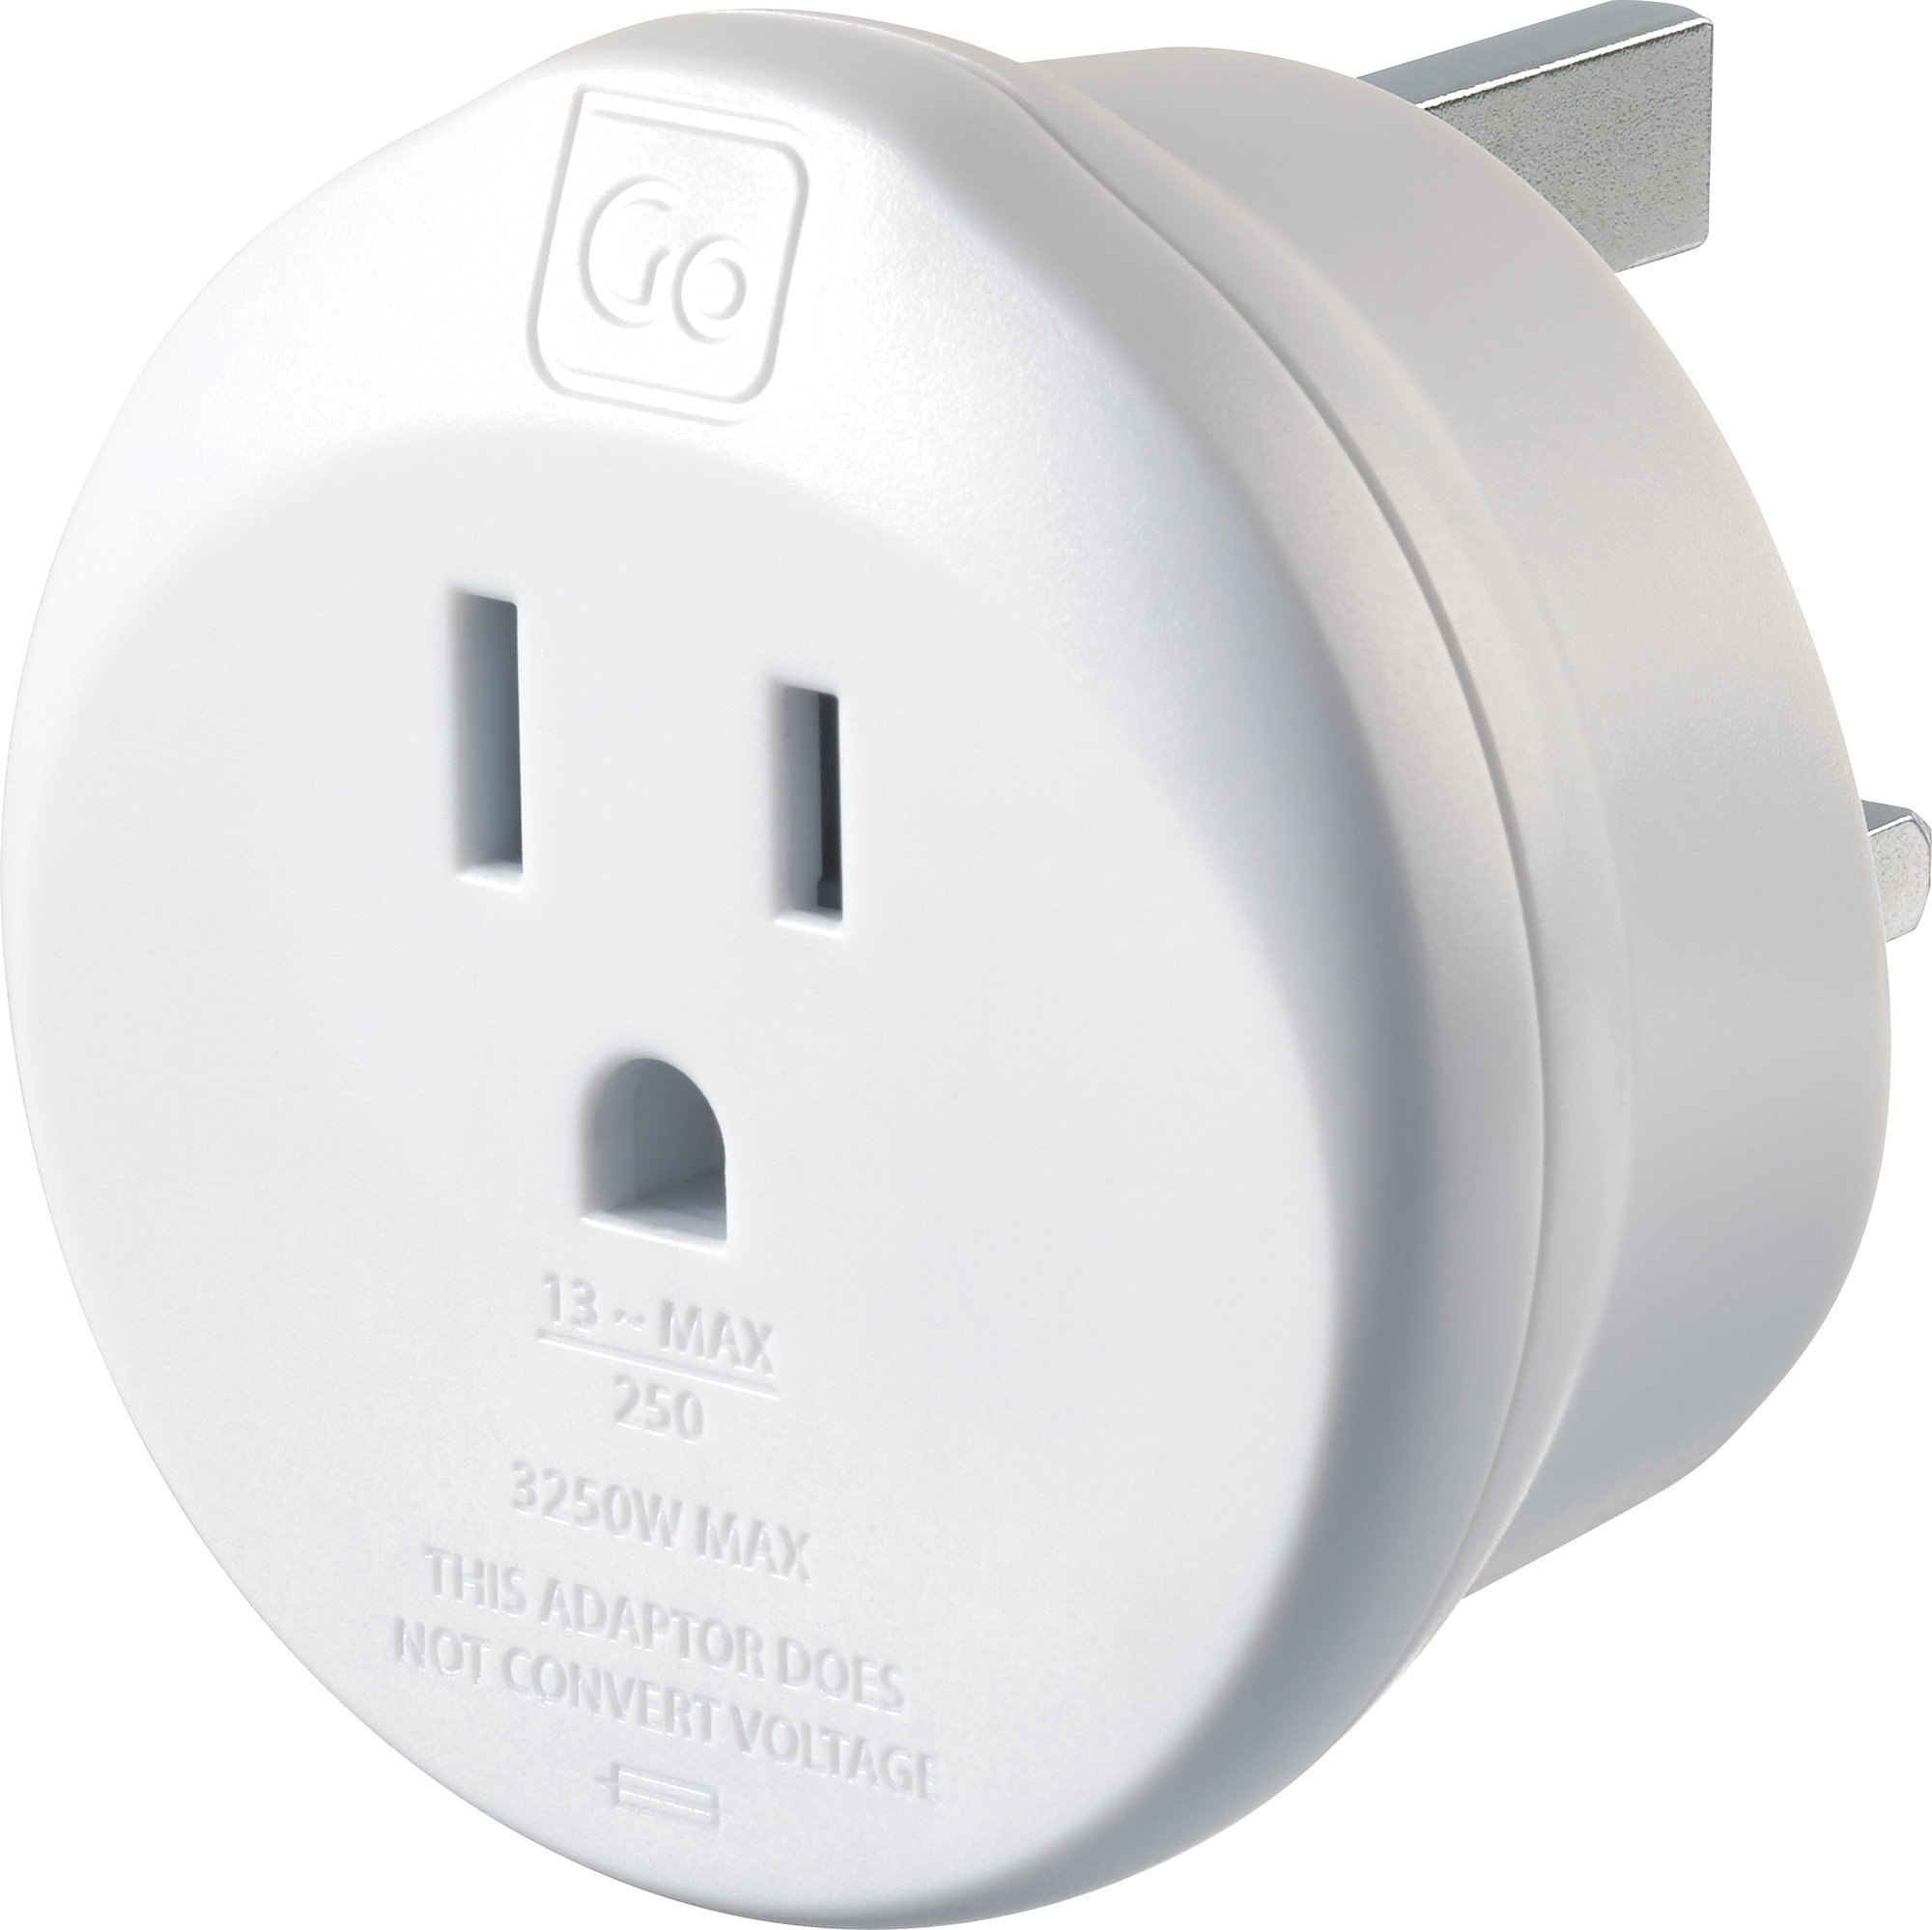 Picture of USA/UK Adapter Twin